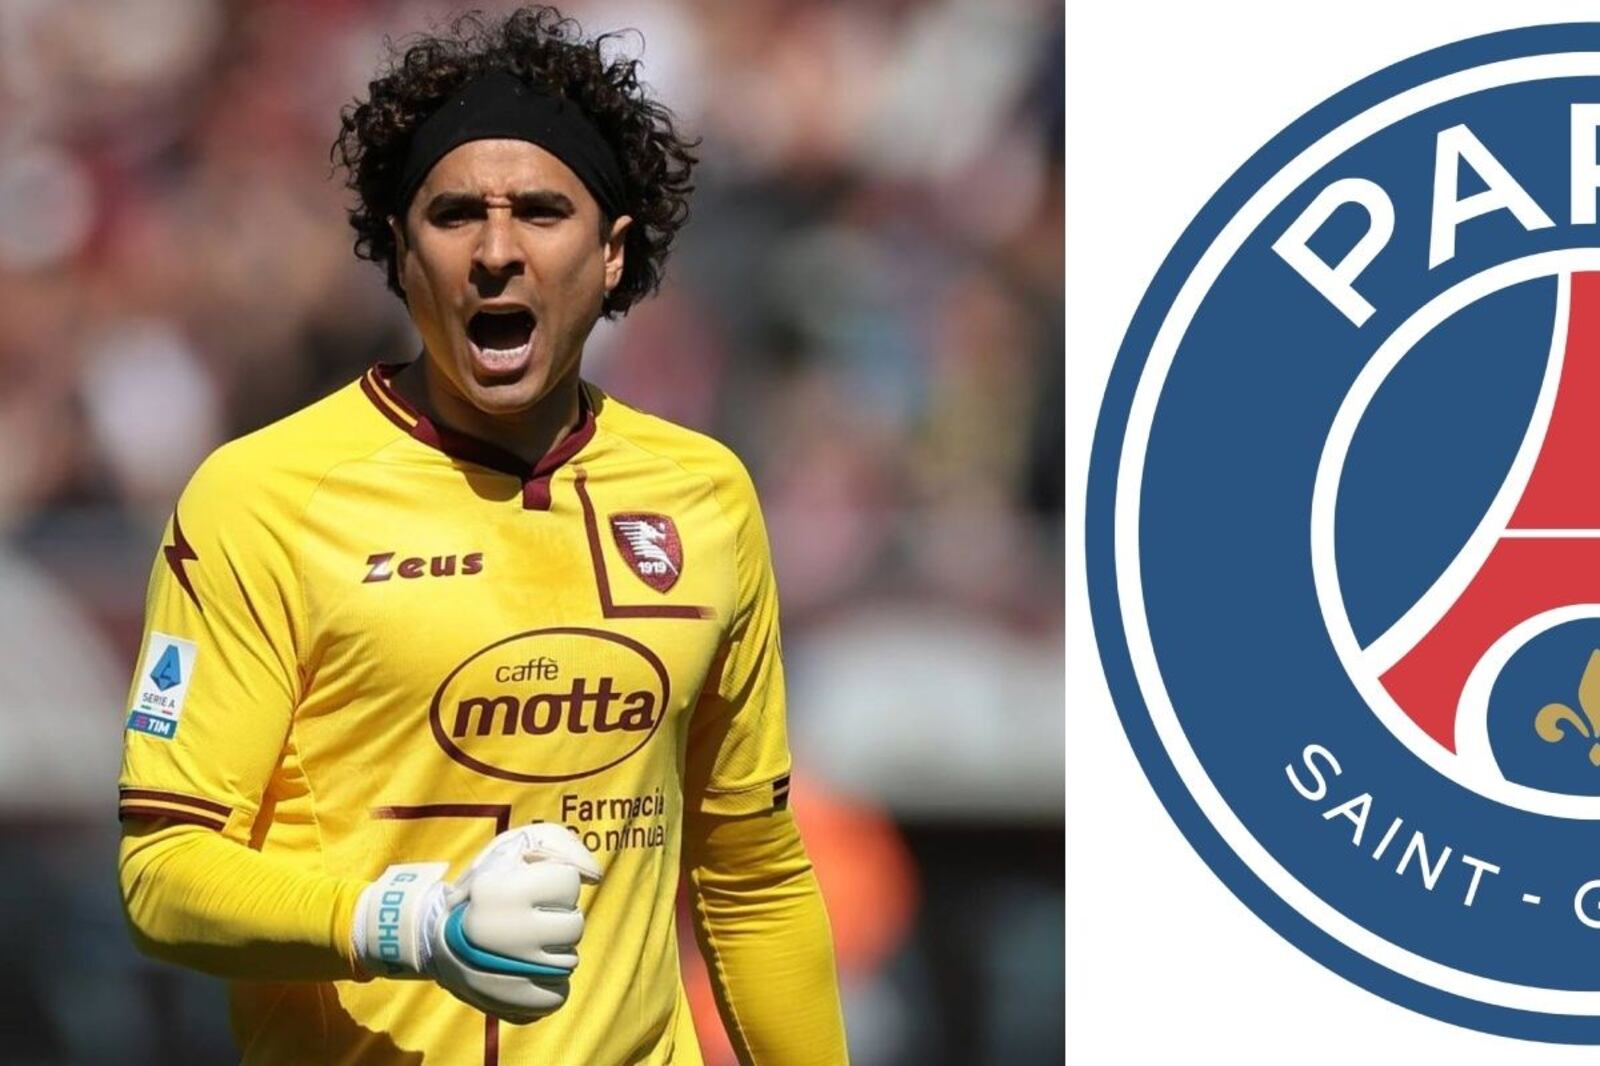 Welcome to PSG Guillermo Ochoa, the signing that has paralyzed all of Europe